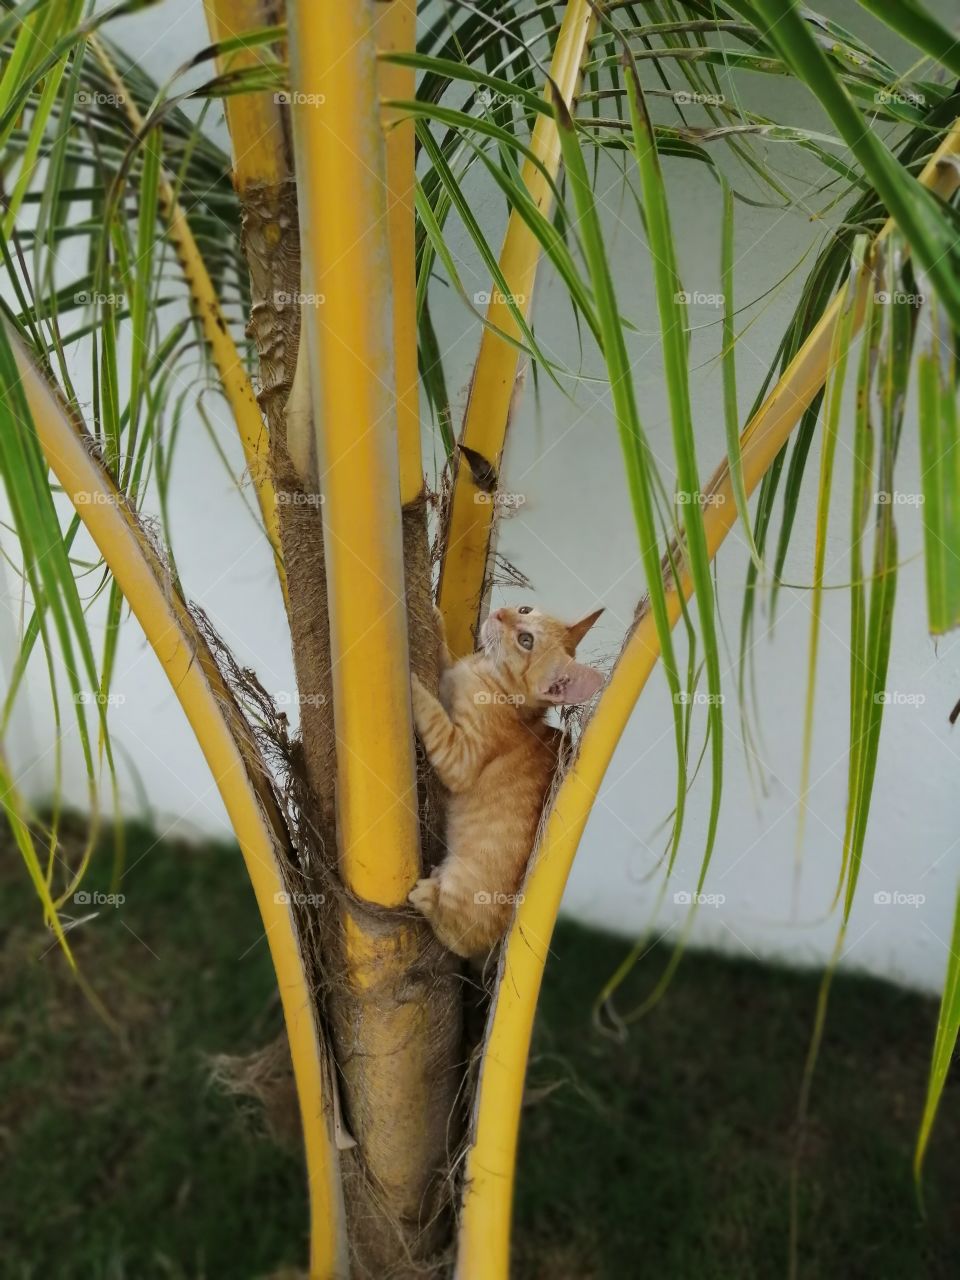 My little kitten is climbing in the coconut tree. She is my nice model in different pose.